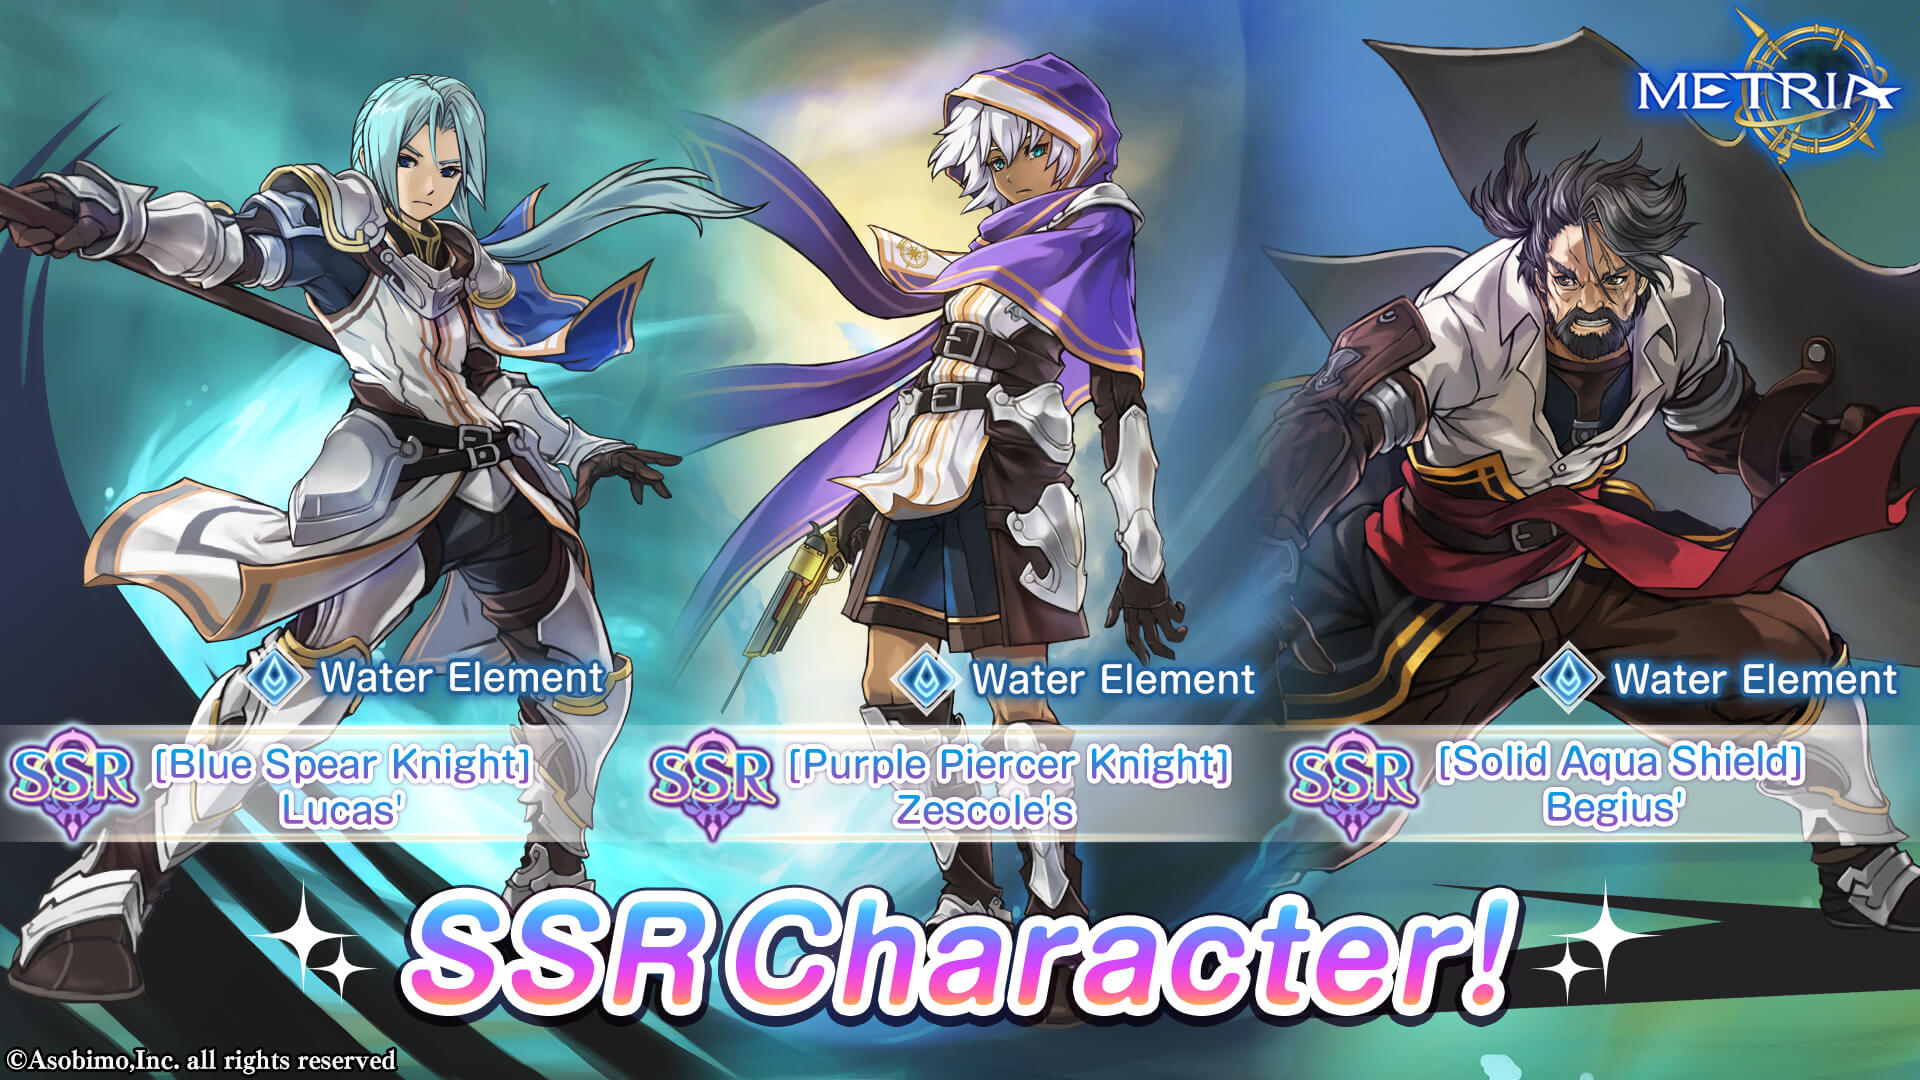 7 Days only! Water Element SSR Character Select Gacha Available for Purchase!